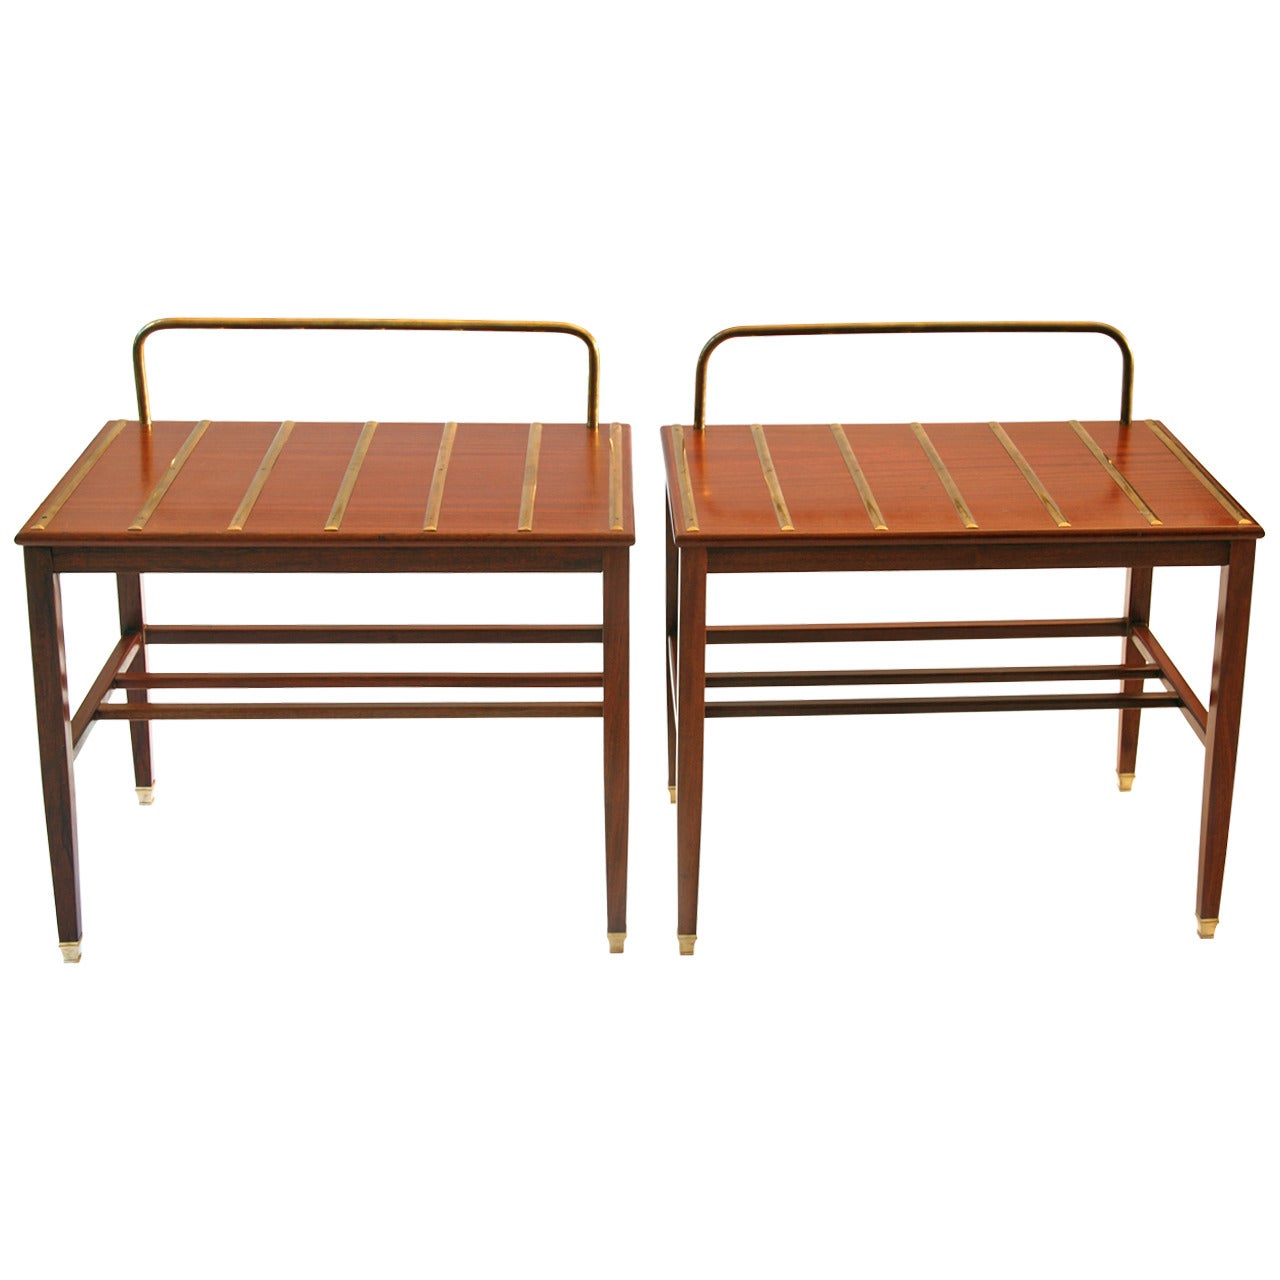 Pair of Gio Ponti Side Tables by Hotel Royal Naples, 1955